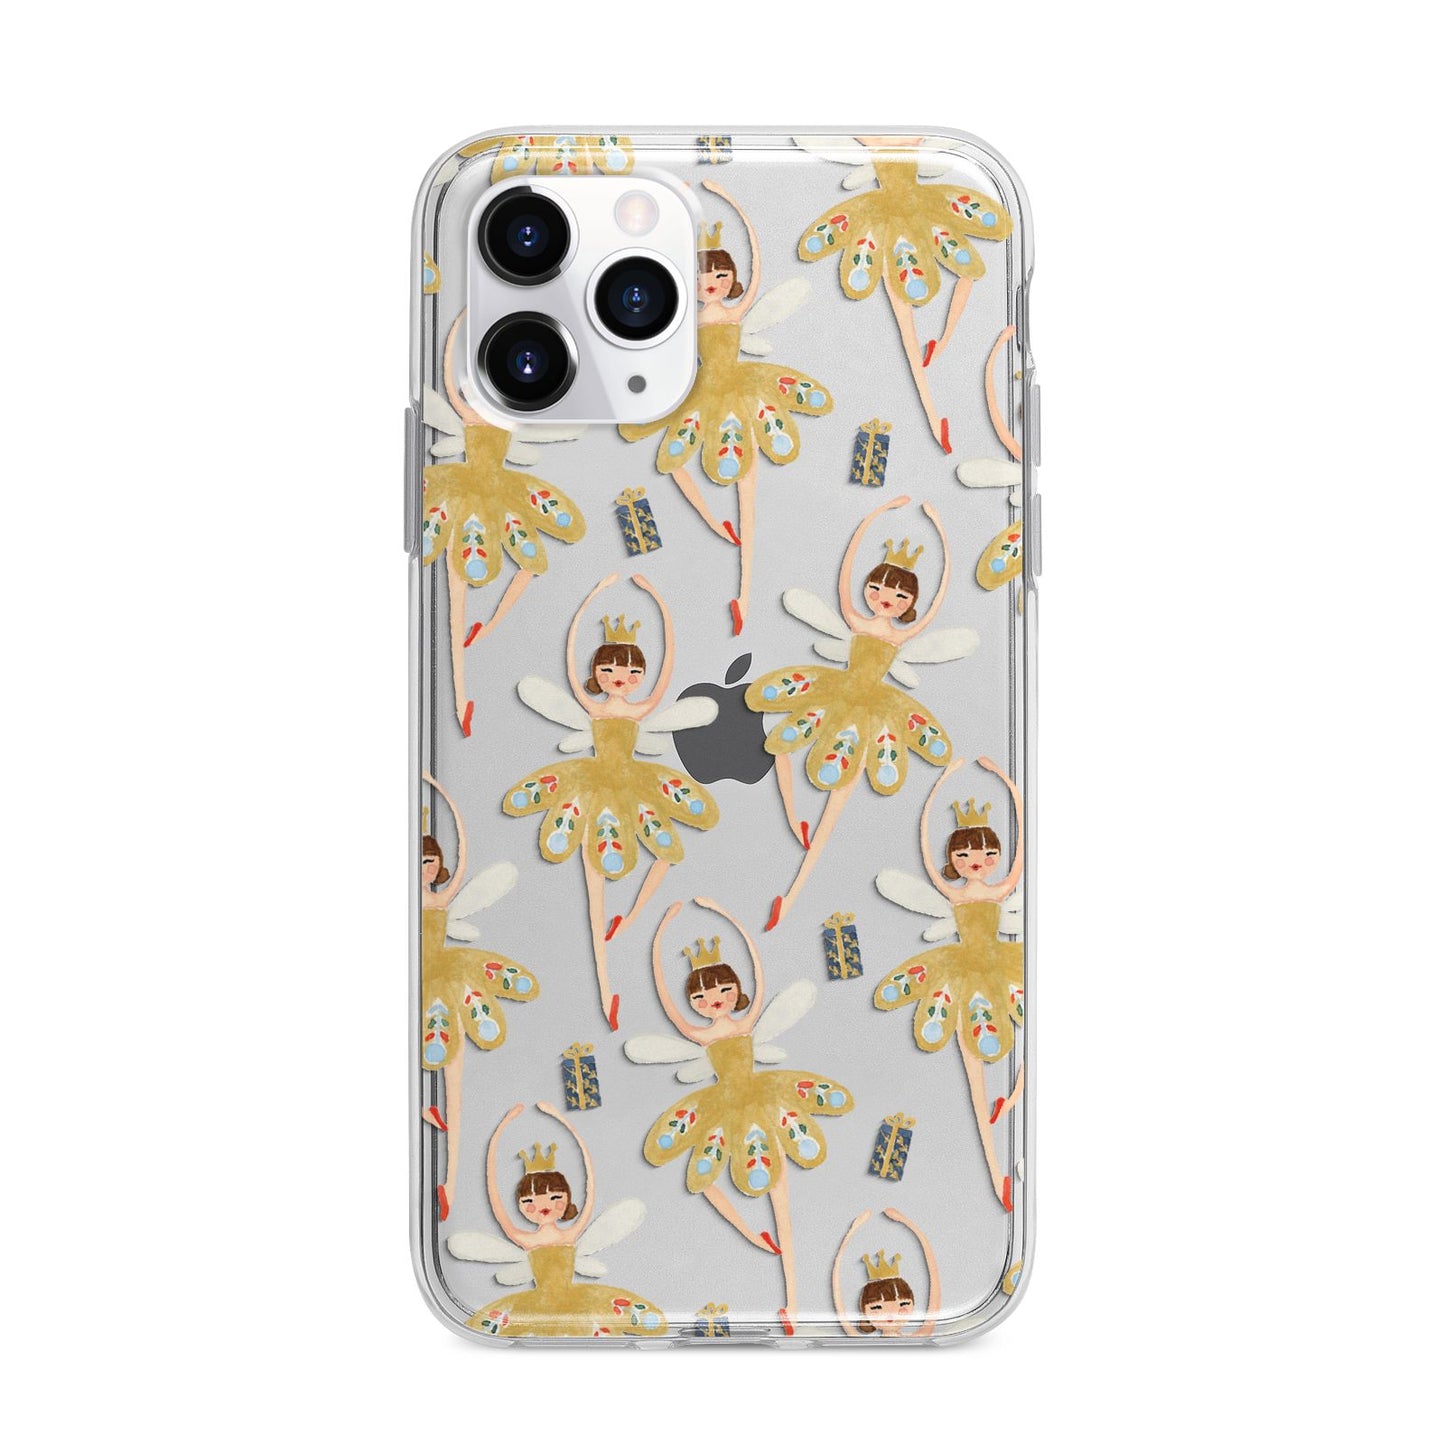 Dancing ballerina princess Apple iPhone 11 Pro Max in Silver with Bumper Case